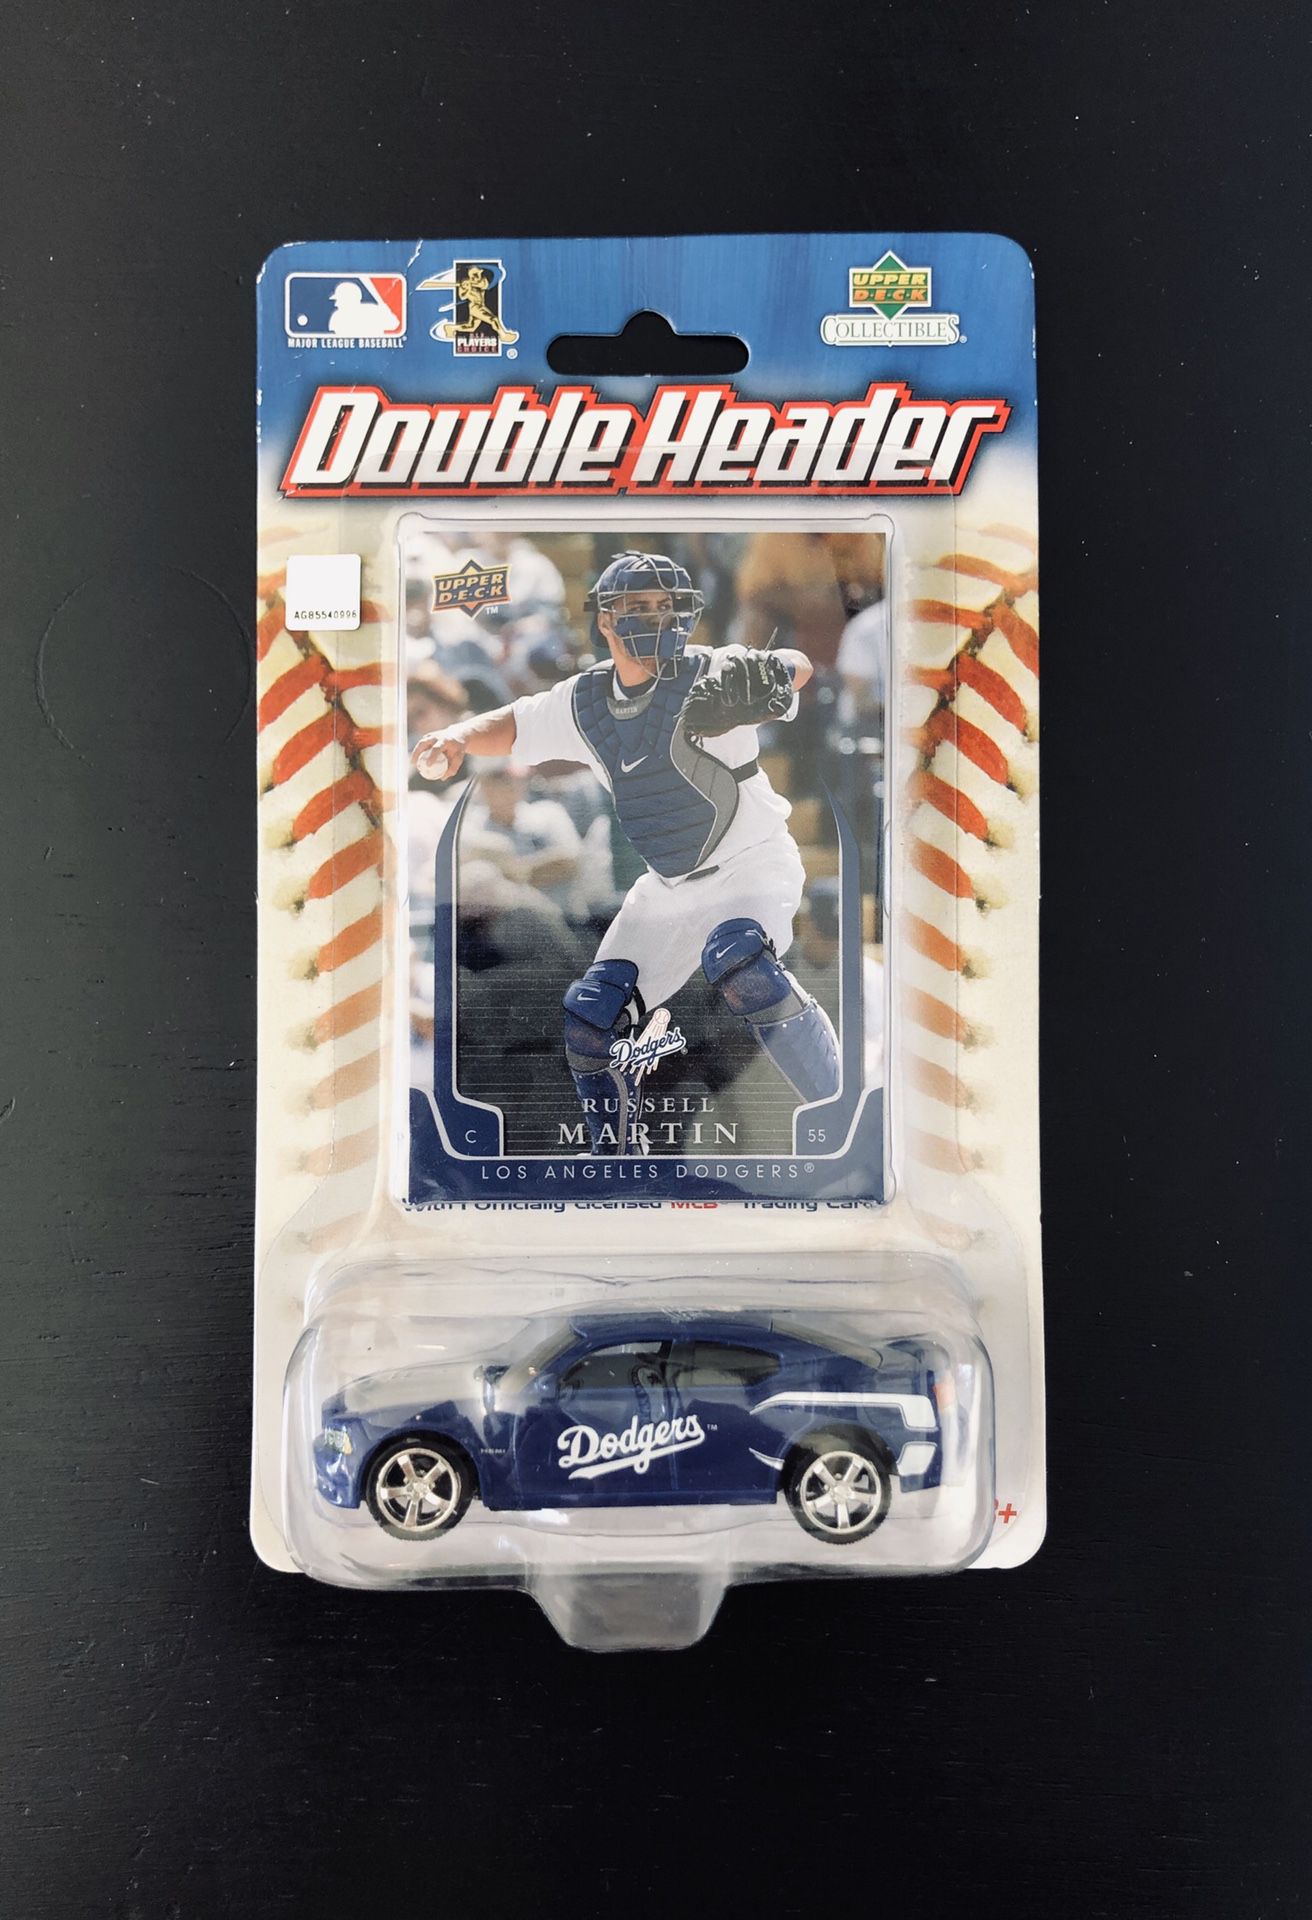 Russell Martin LA Los Angeles Dodgers MLB Baseball UpperDeck Double Header Collectible Die Cast Toy Car with Trading Card - BRAND NEW!!